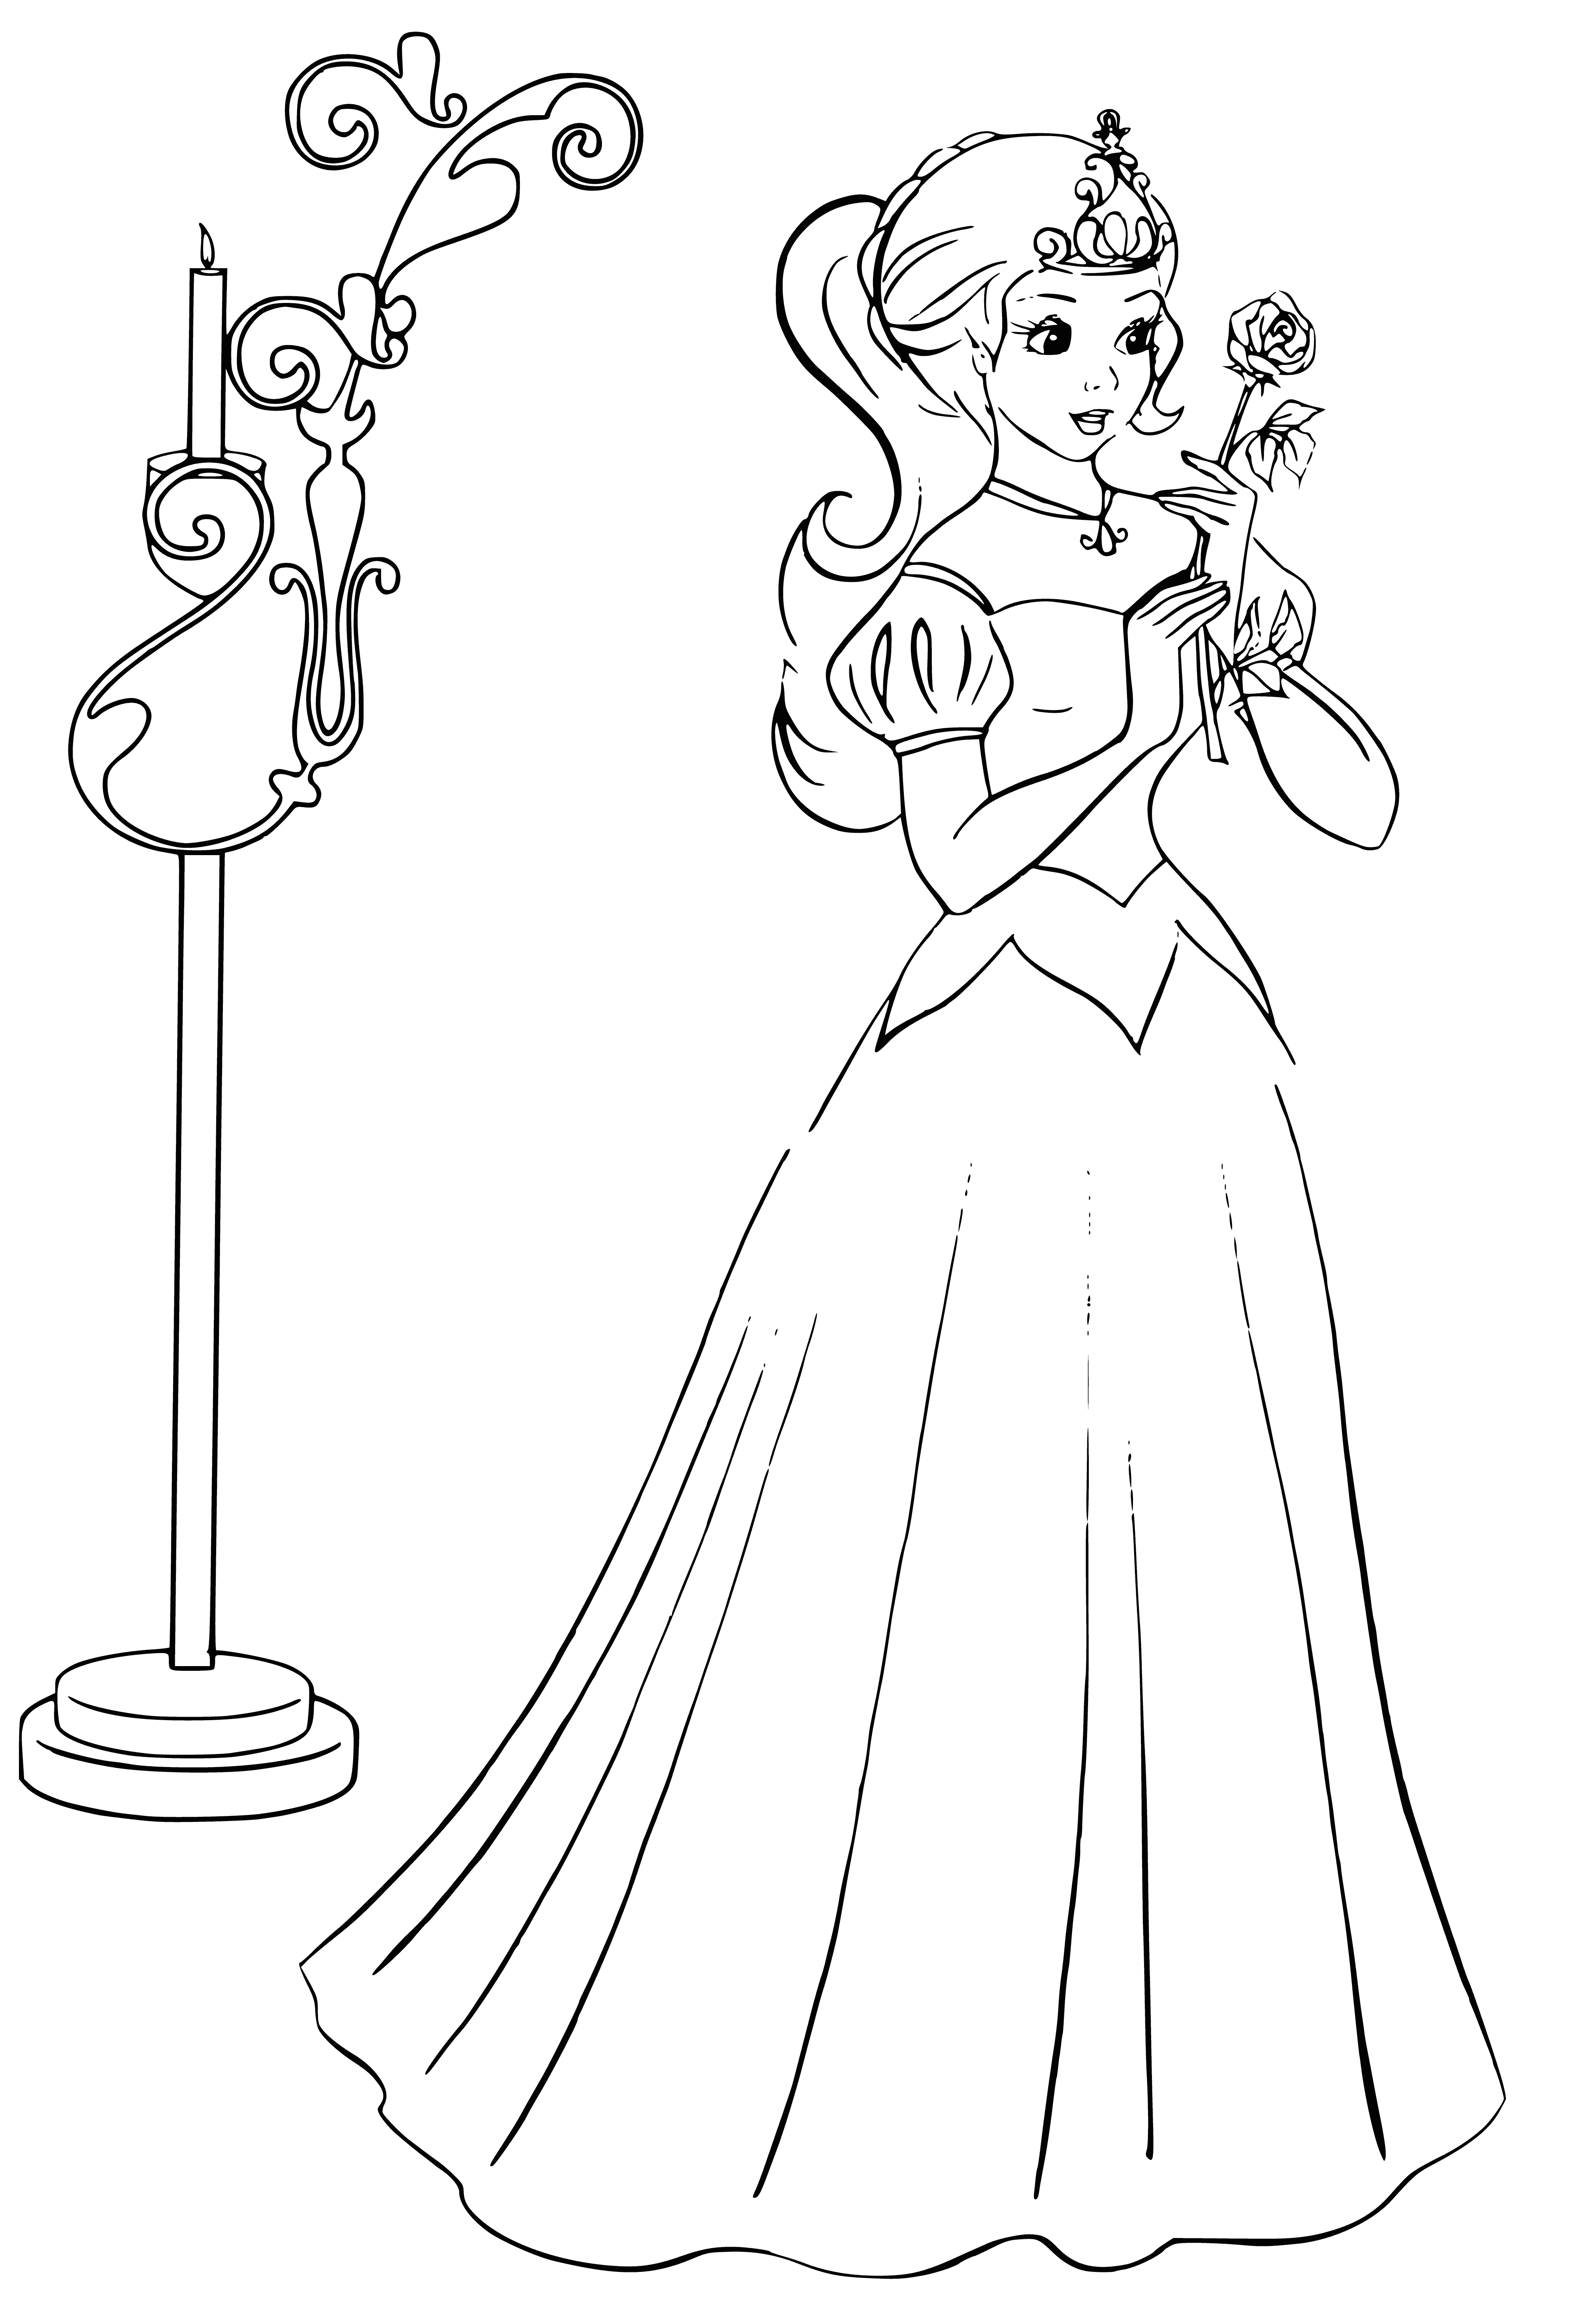 Princess with a flower in her hand coloring page